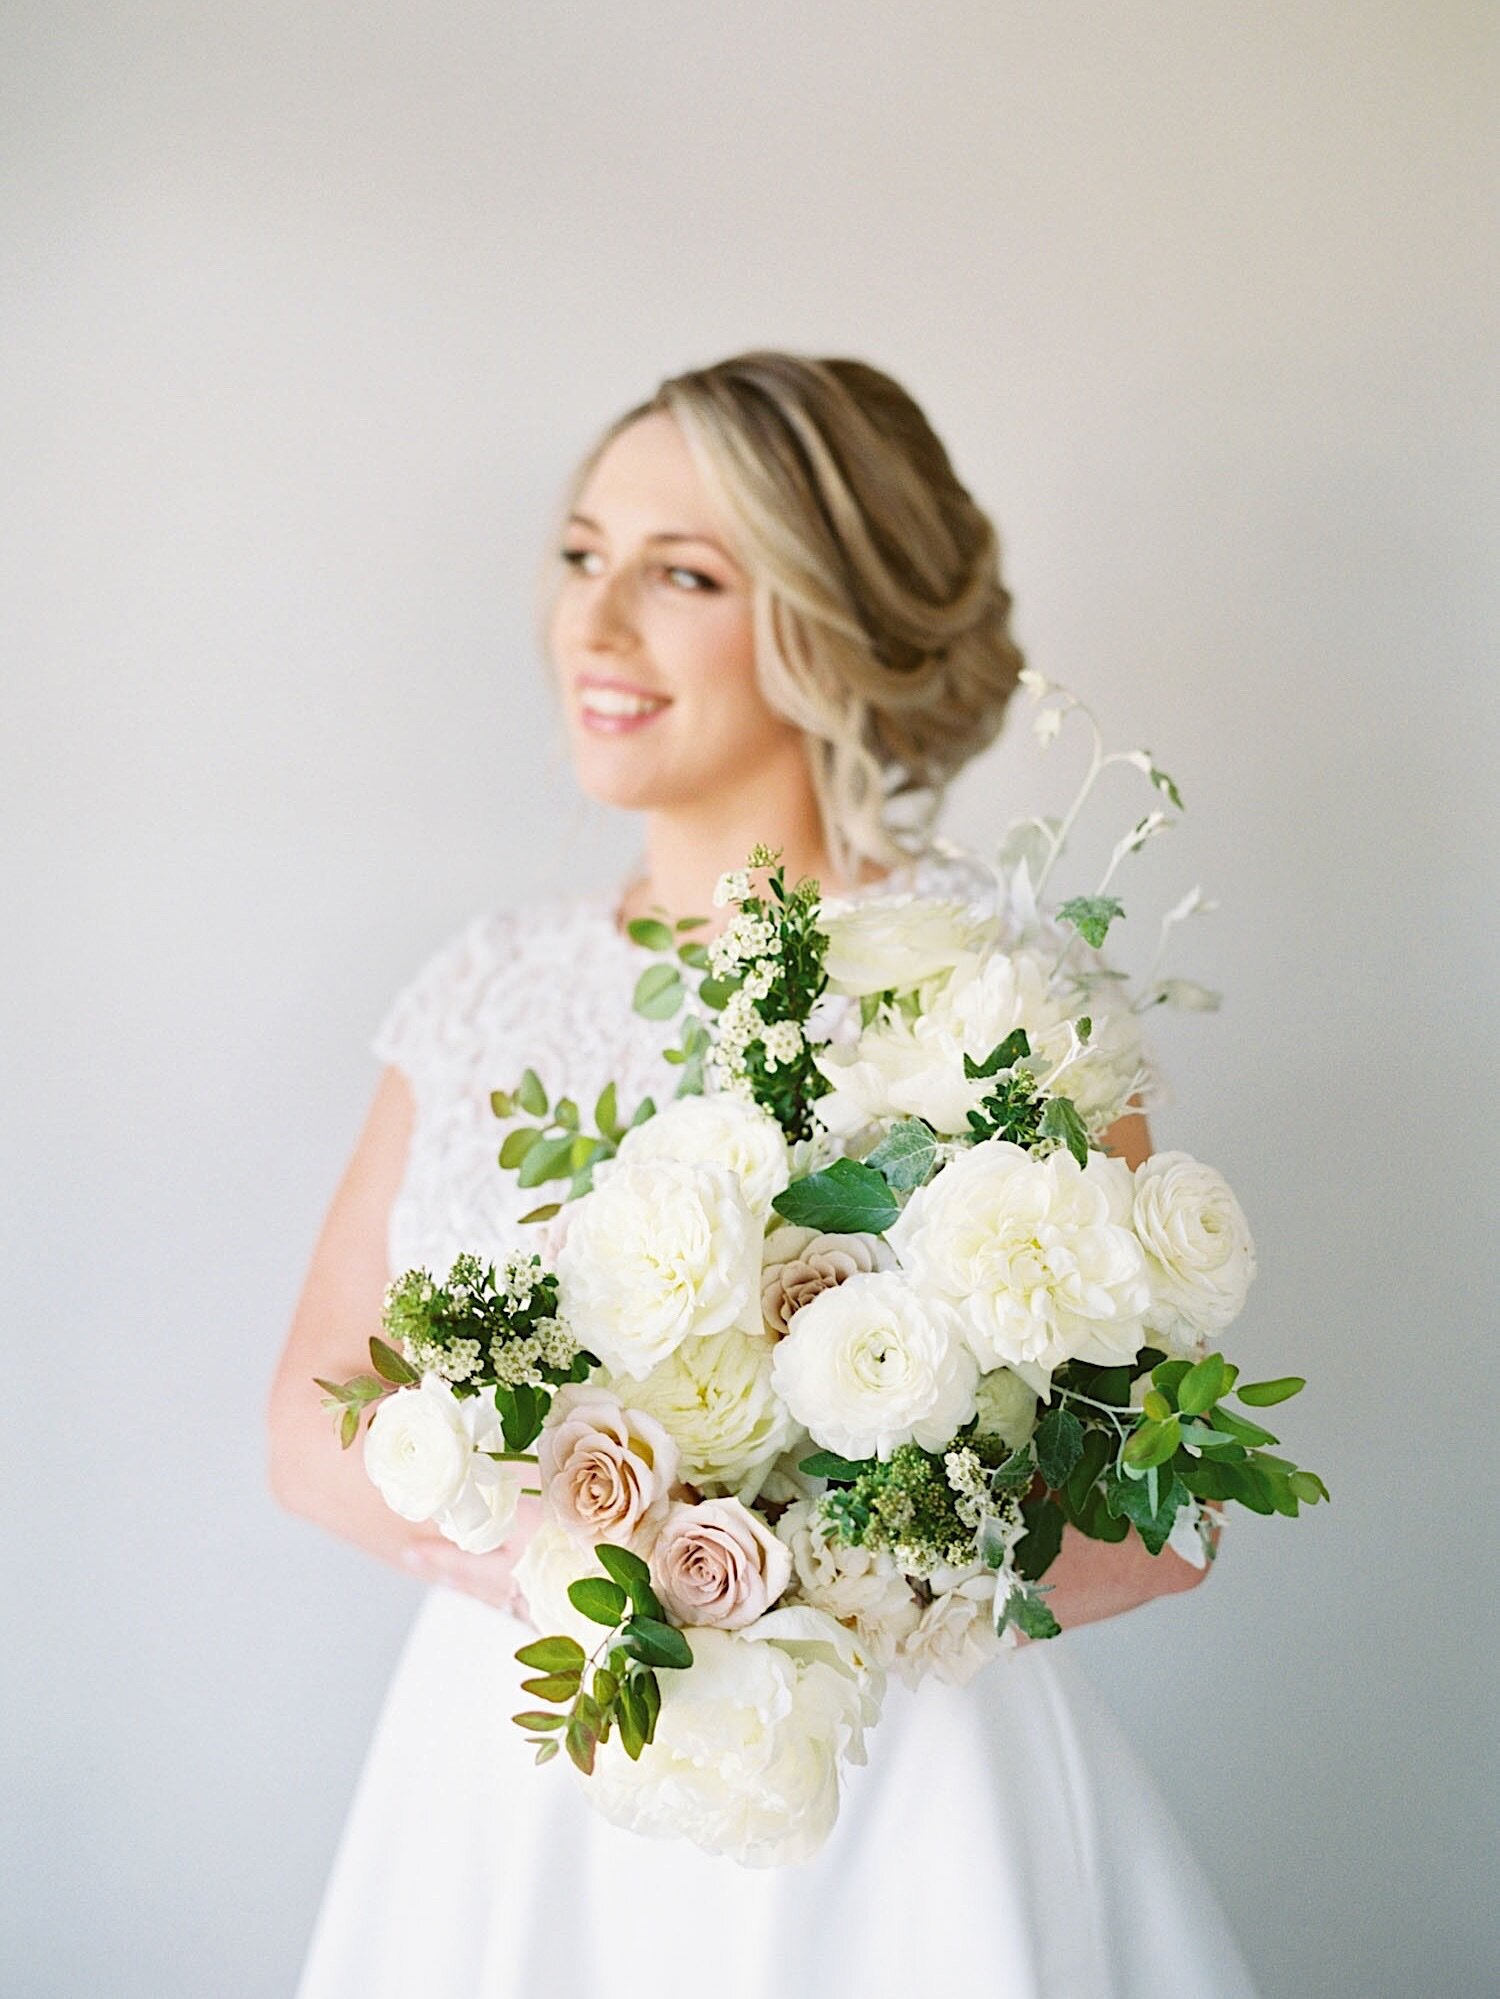 Bridal portrait with romantic green and white bouquet from Seattle Wedding Florist Gather Design Company